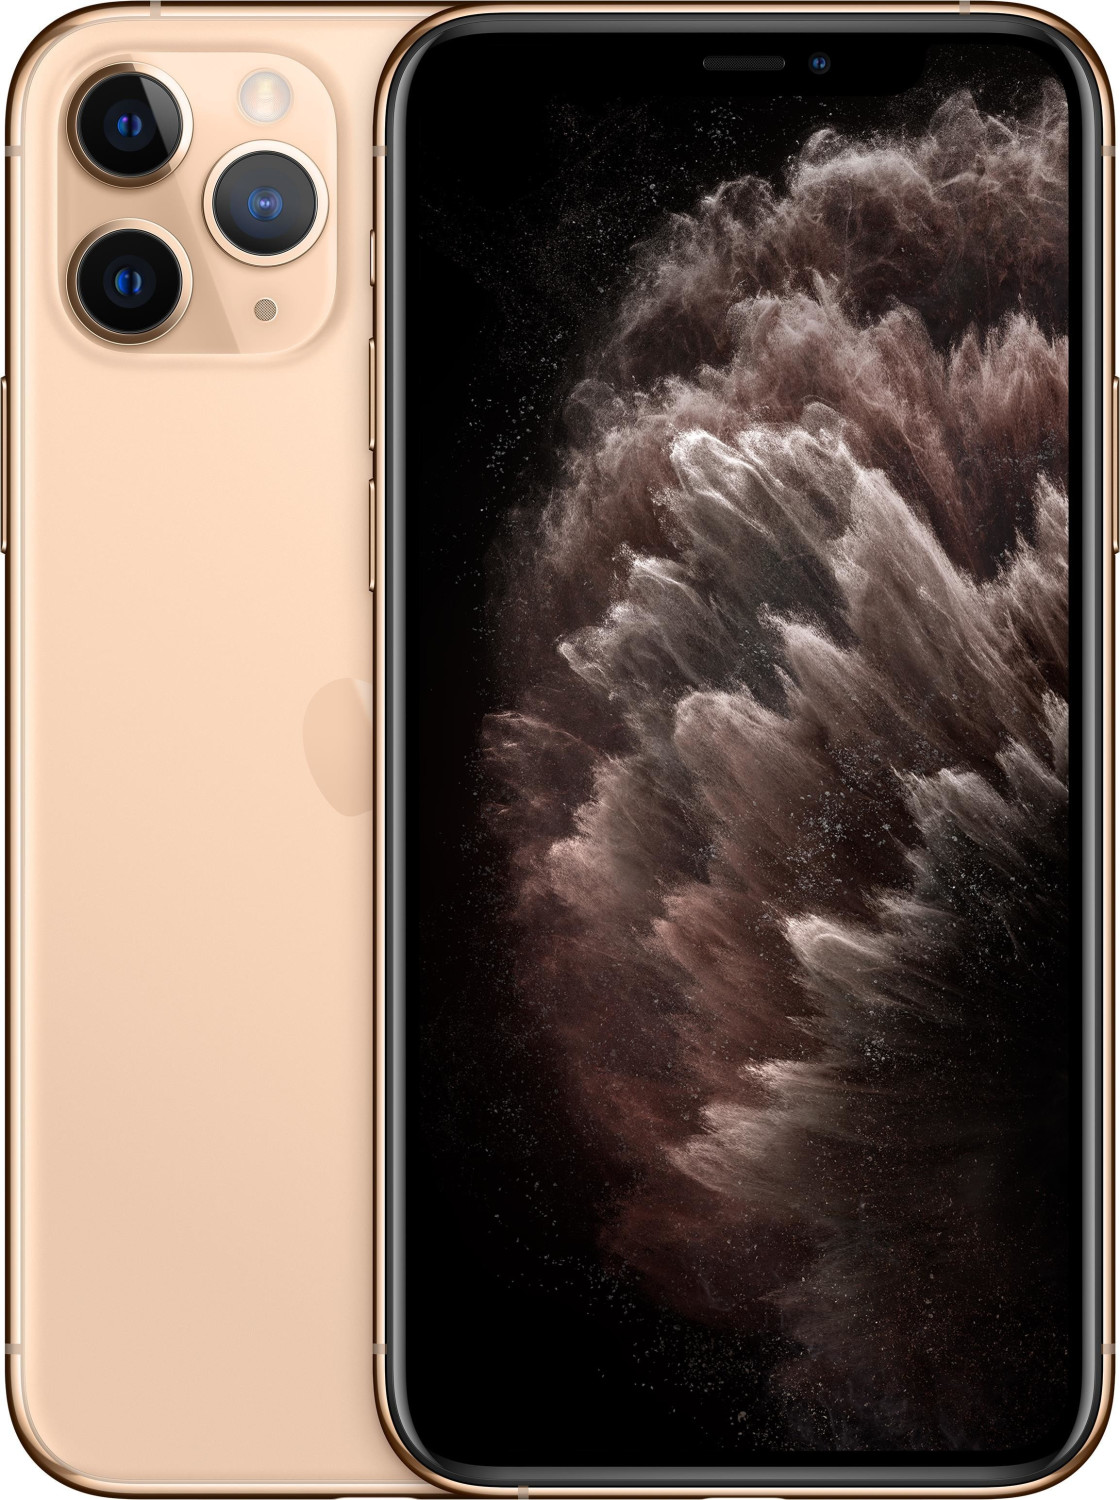 Buy Apple iPhone 11 Pro 512GB Gold from £1,669.00 (Today) – Best